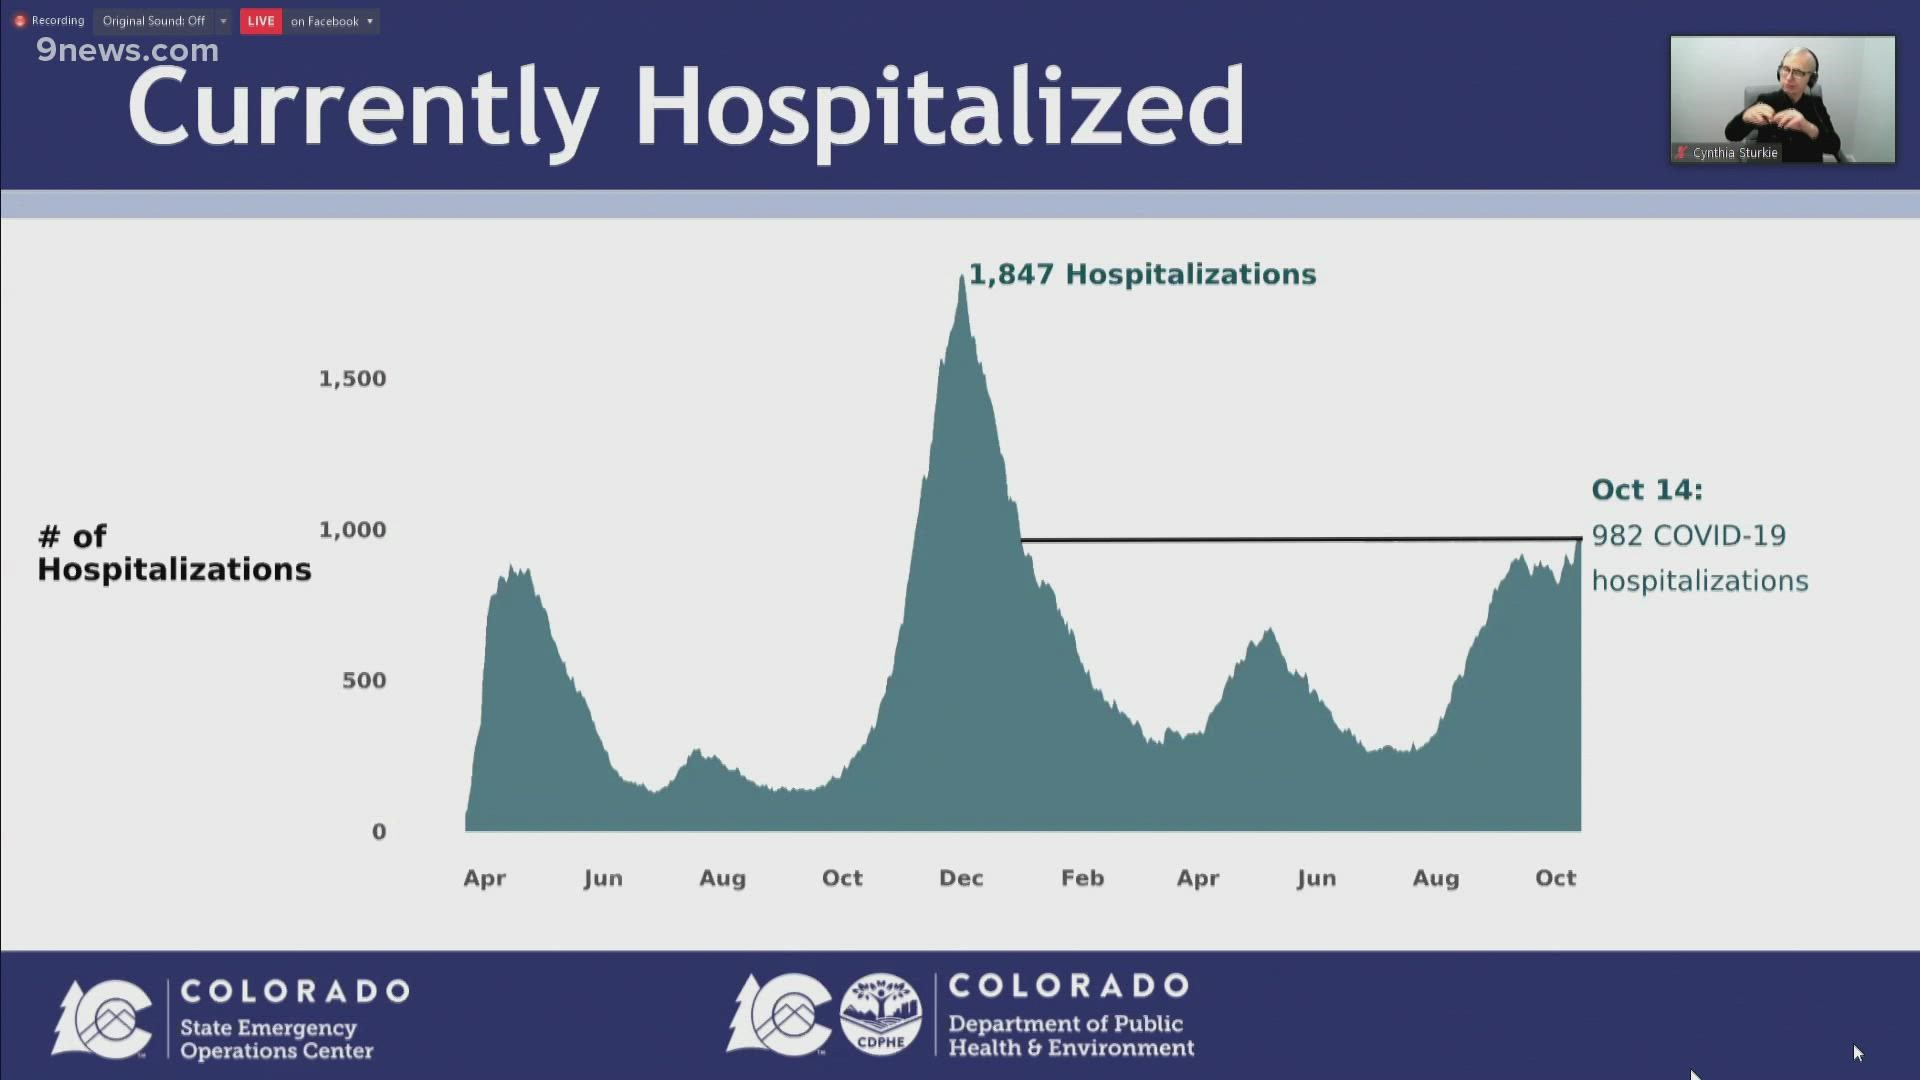 Health officials in Colorado provided an update on the latest on the coronavirus pandemic and vaccinations in the state on Friday, Oct. 15, 2021.